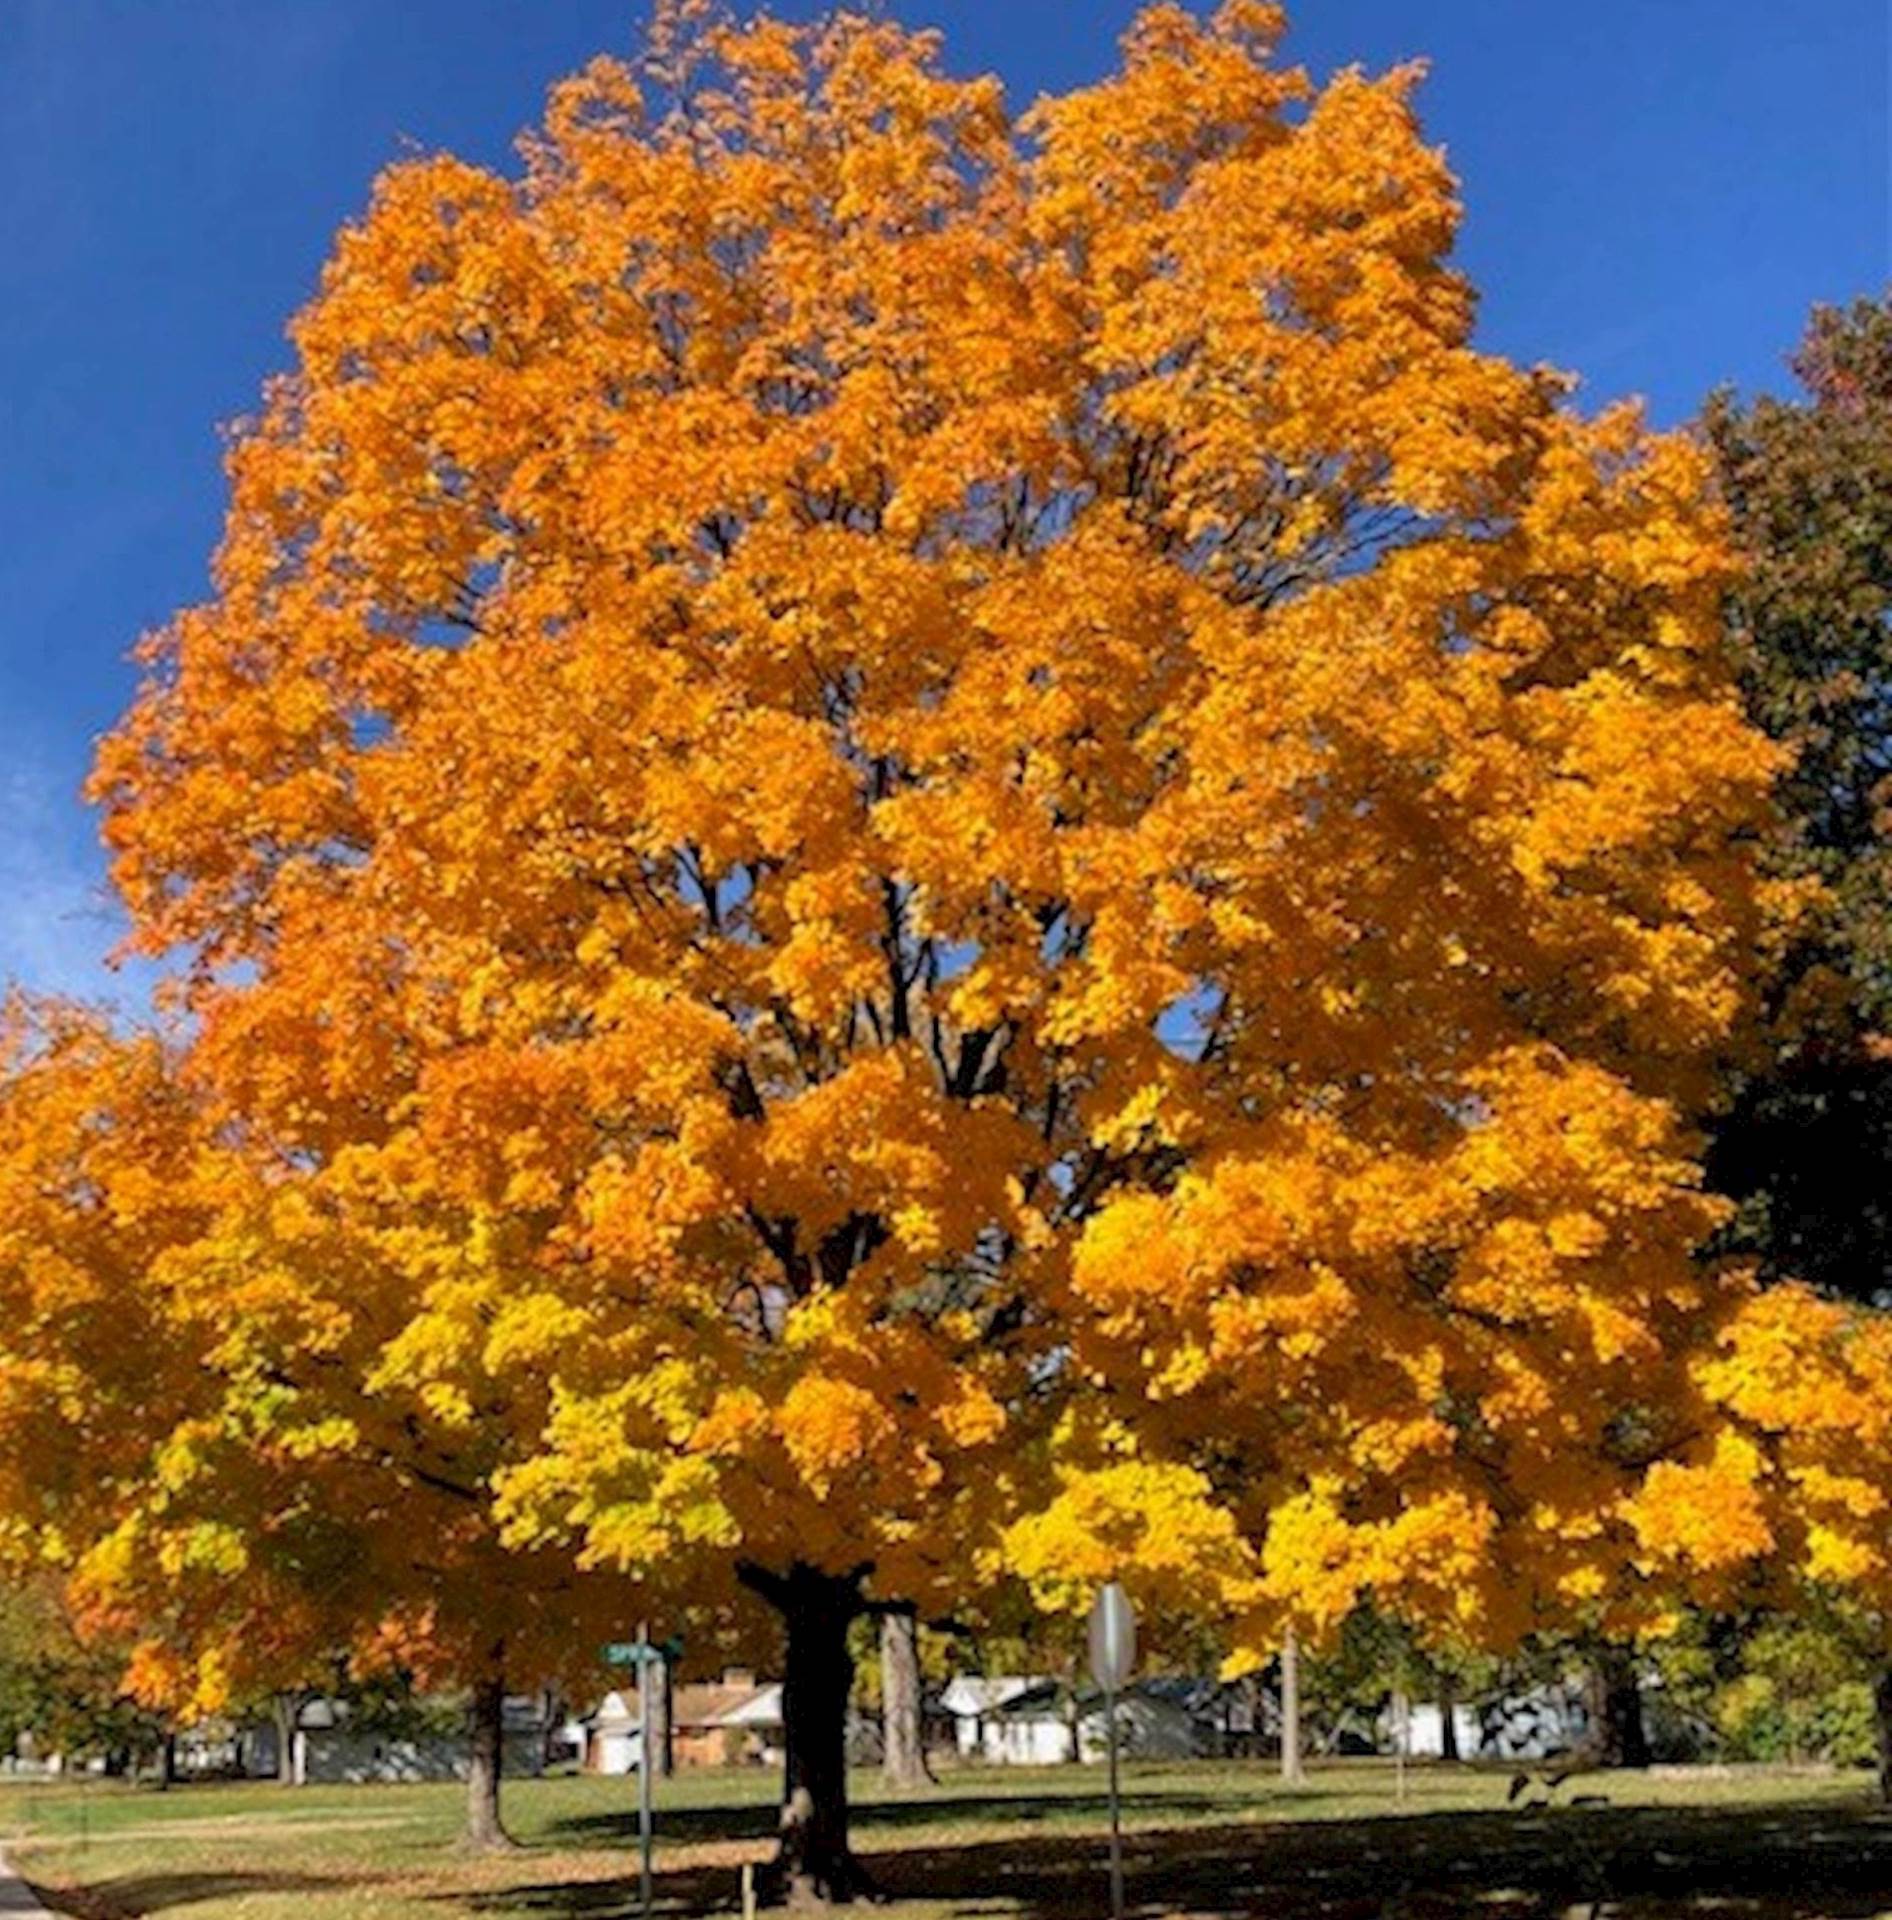 Photo of a large sugar maple tree in the fall with yellow and orange leaves